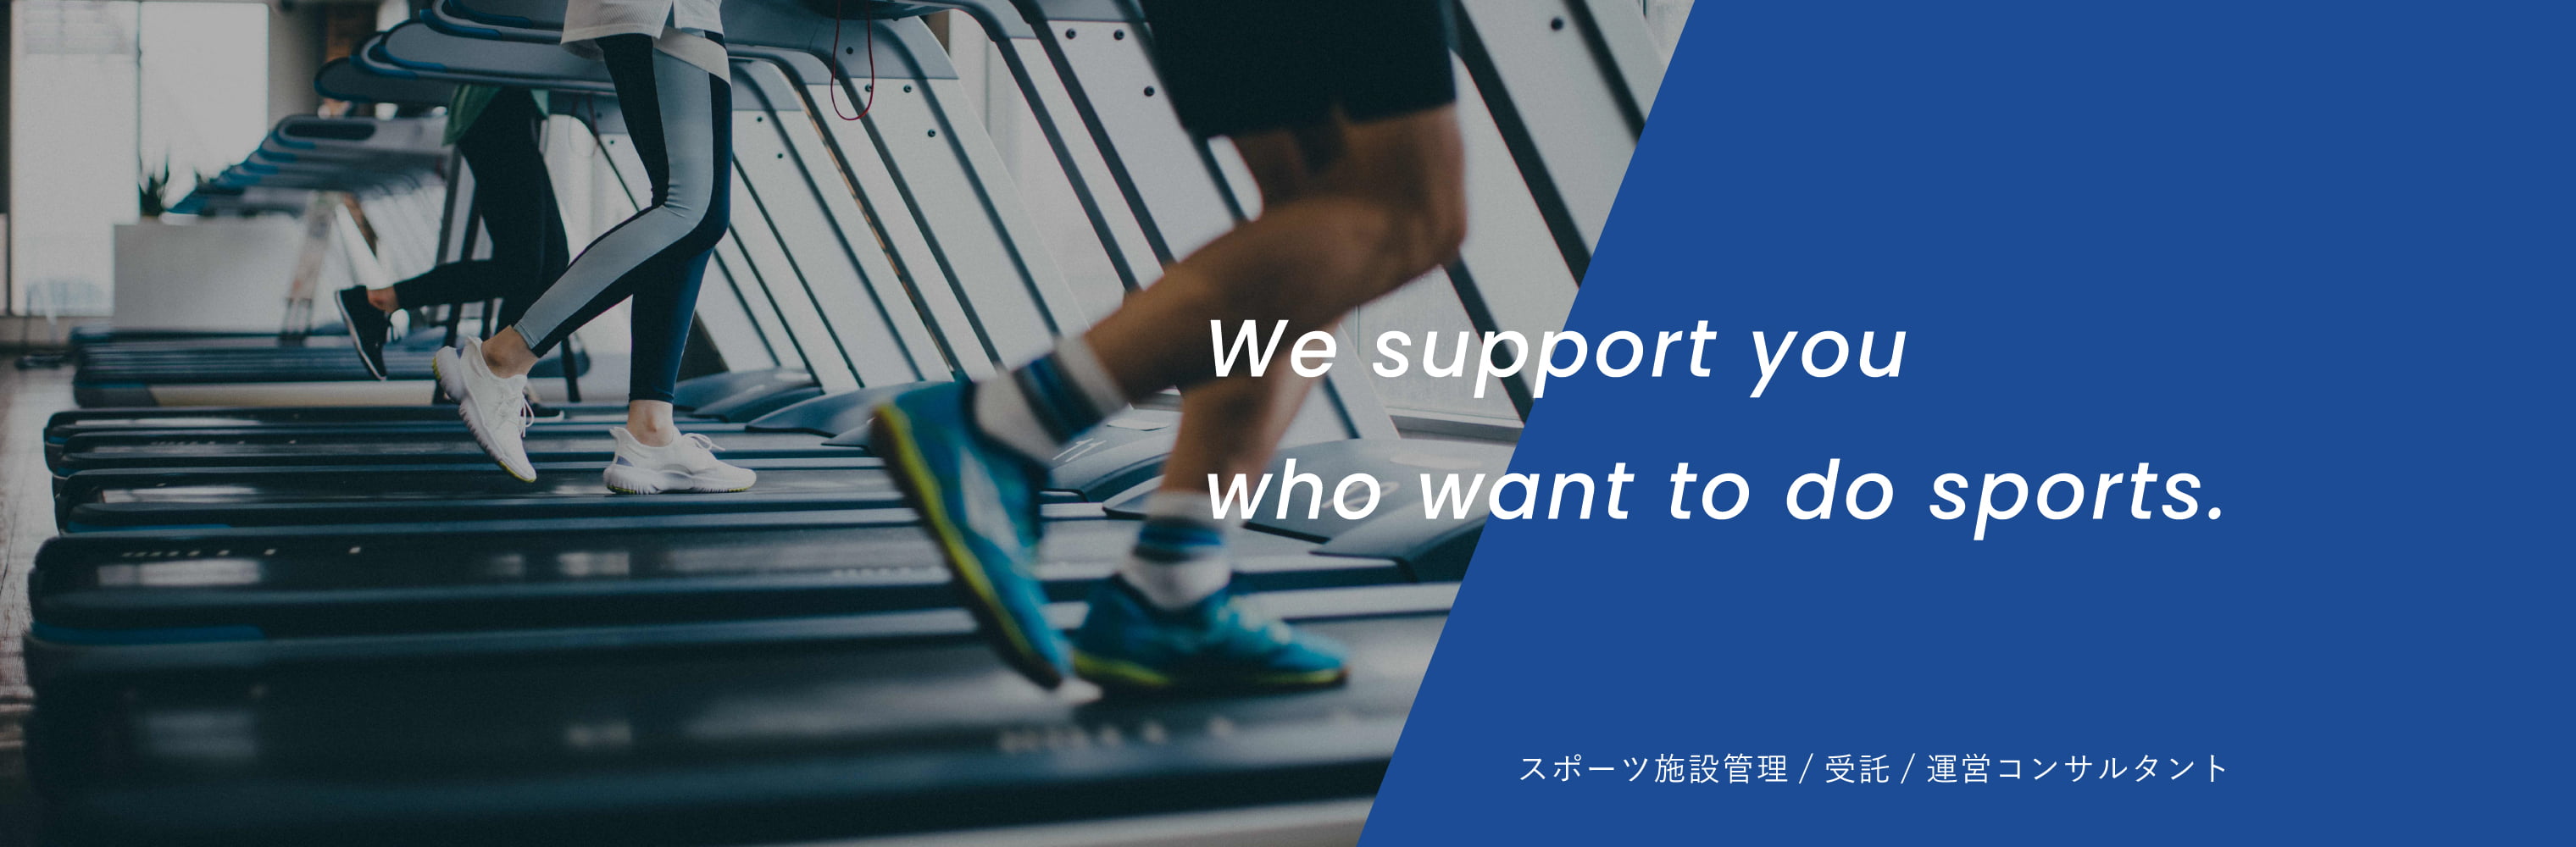 We Support you who want to do sports. スポーツ施設管理／受託／運営コンサルタント